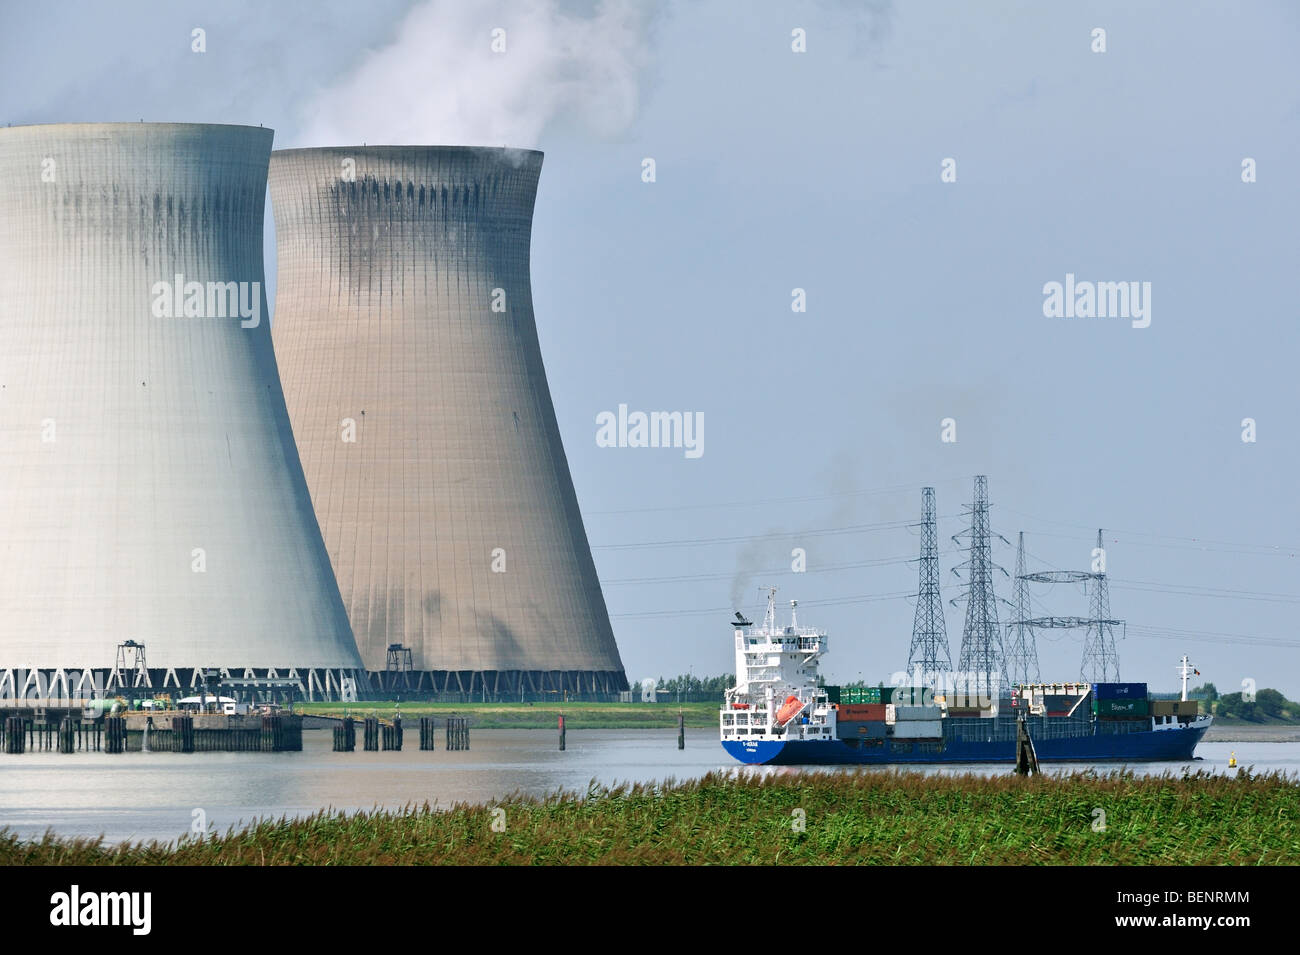 Container ship on the river Scheldt in front of the cooling towers of the nuclear power plant at Doel, Belgium Stock Photo